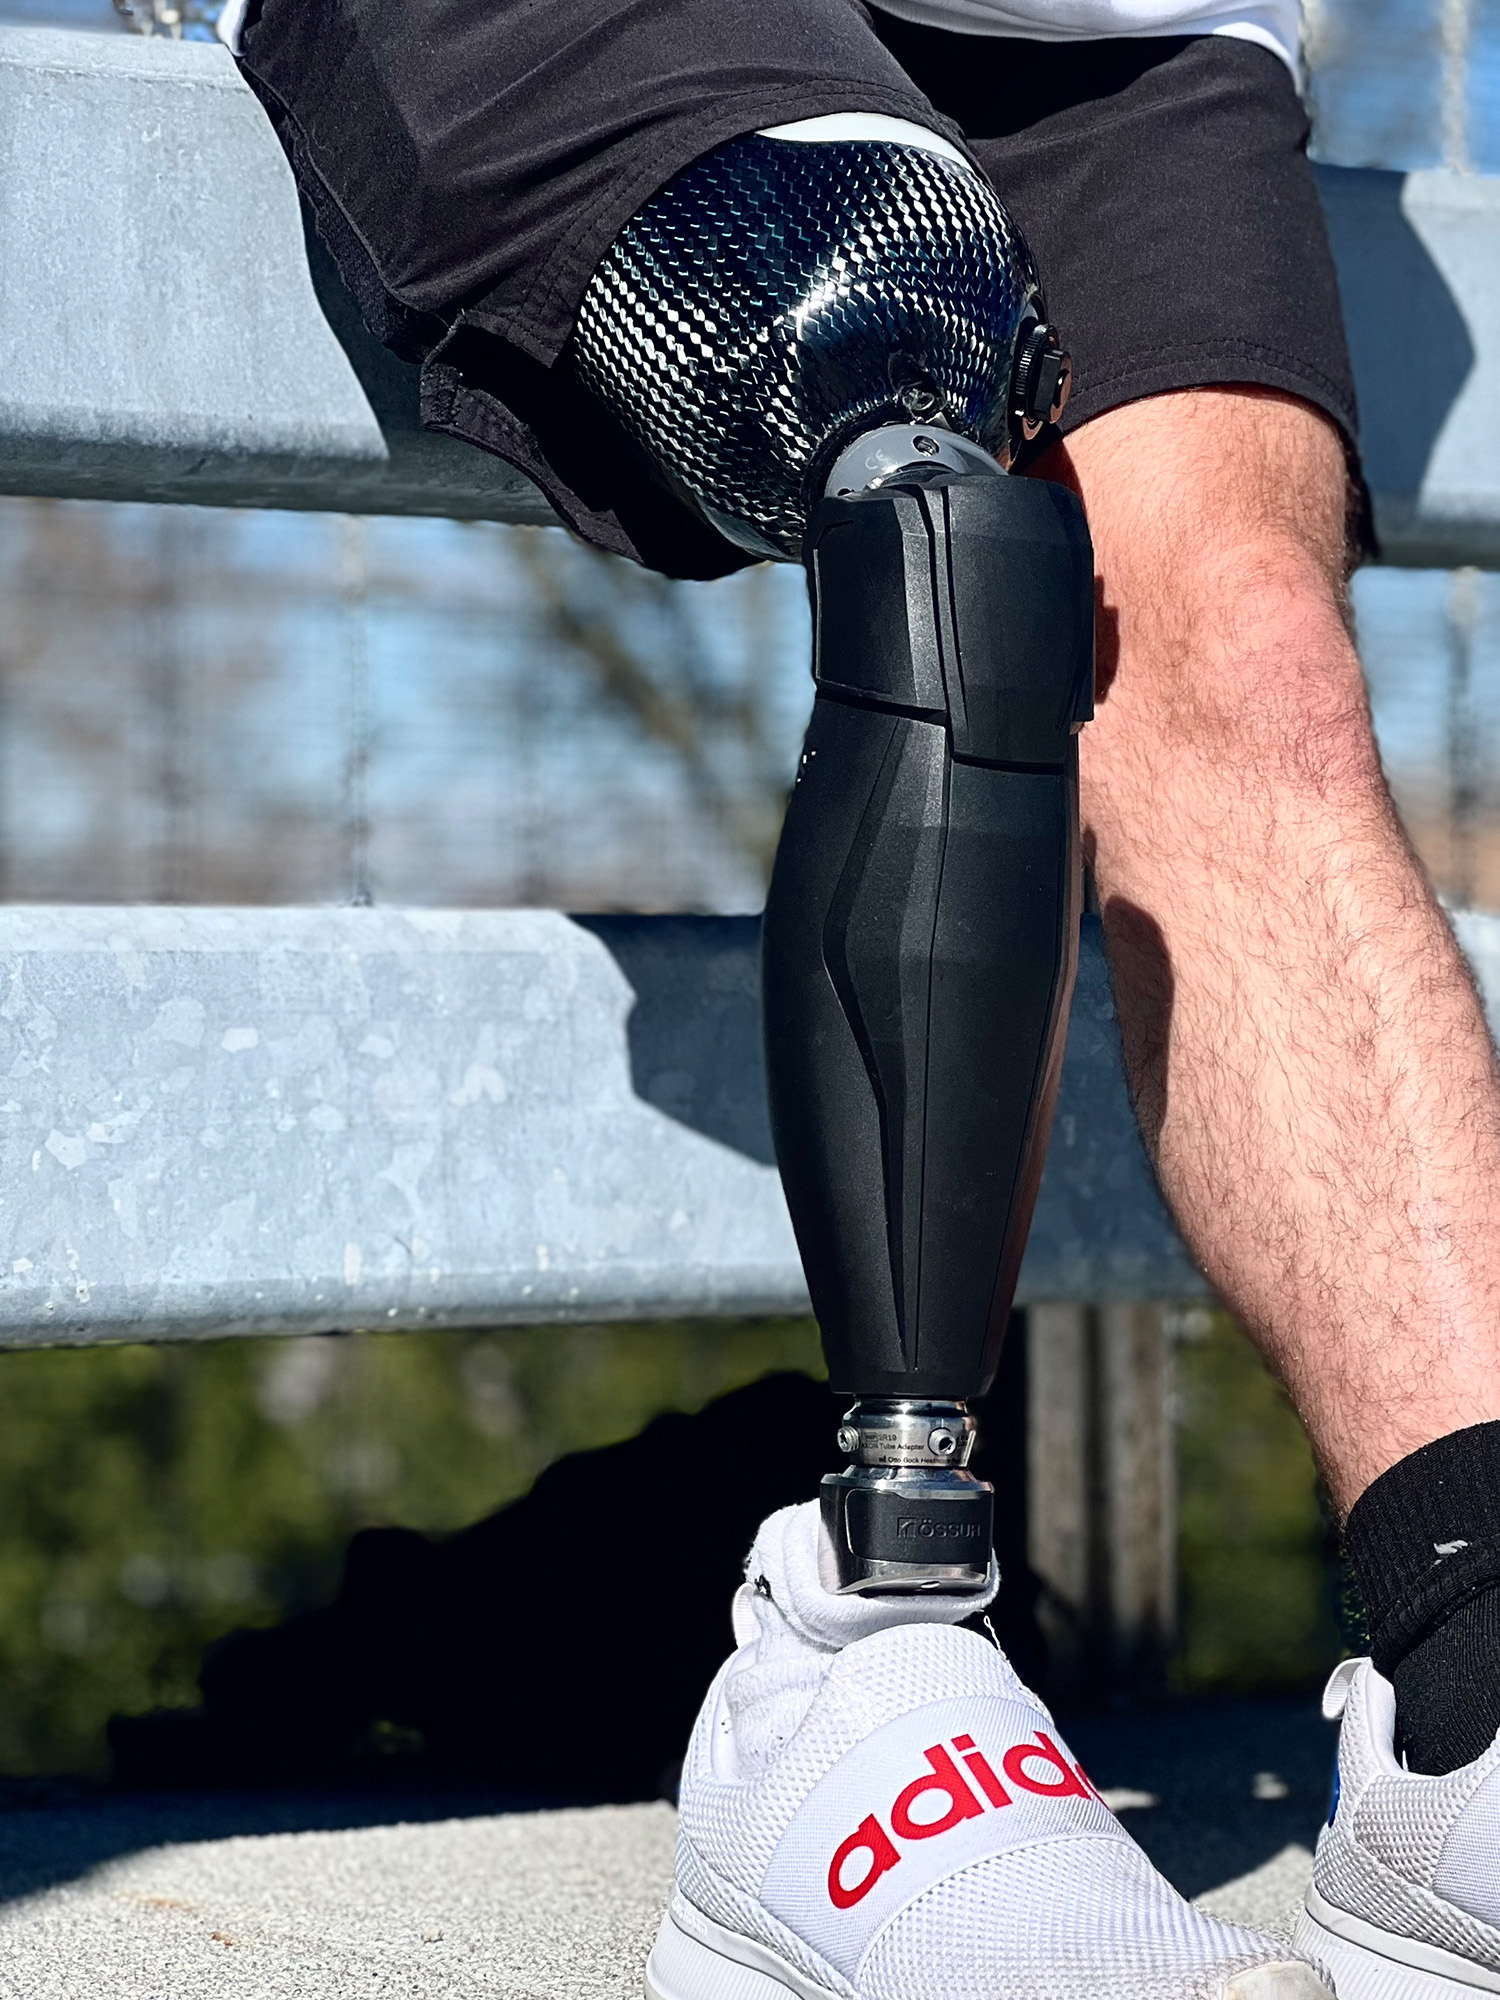 A man with a prosthetic leg wearing shoes.